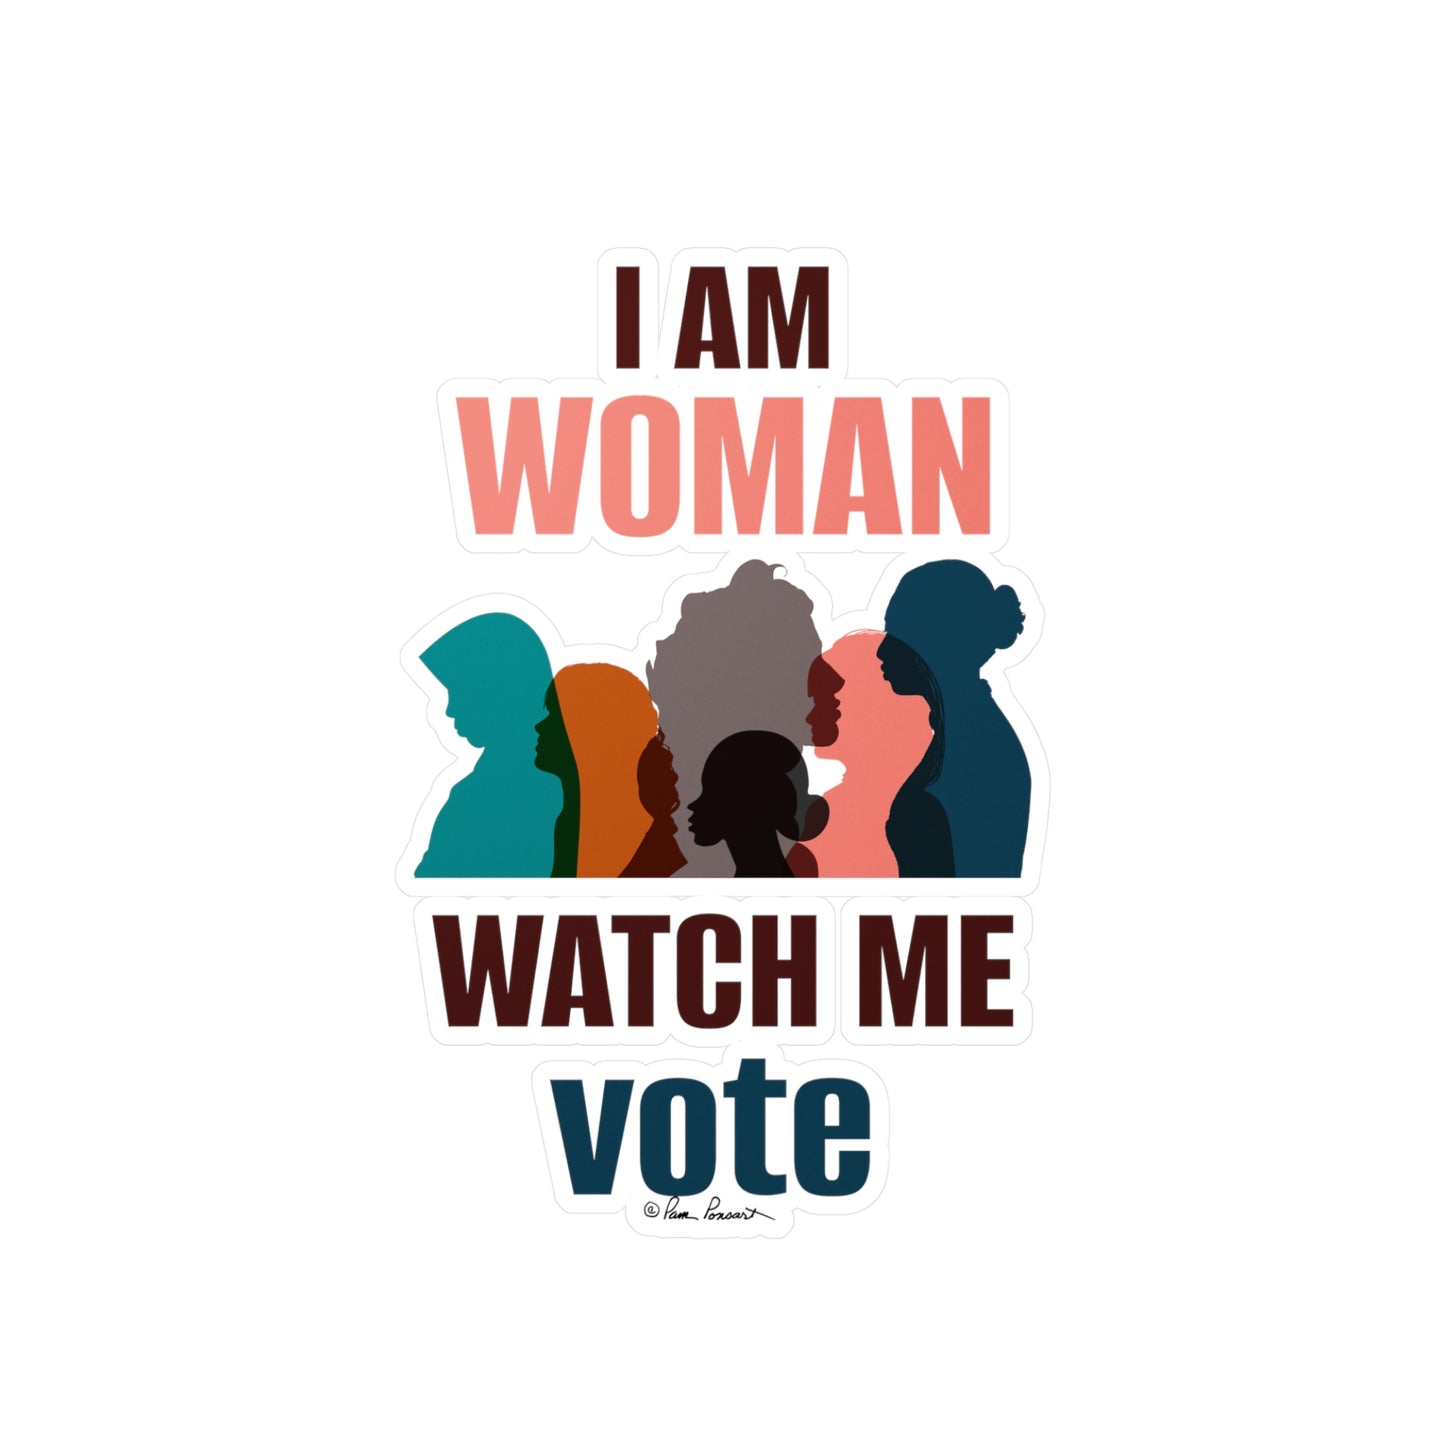 Voting Women's Decals from Printify featuring silhouettes of diverse women with the text "i am woman watch me vote" in bold letters, made with removable adhesive white vinyl.